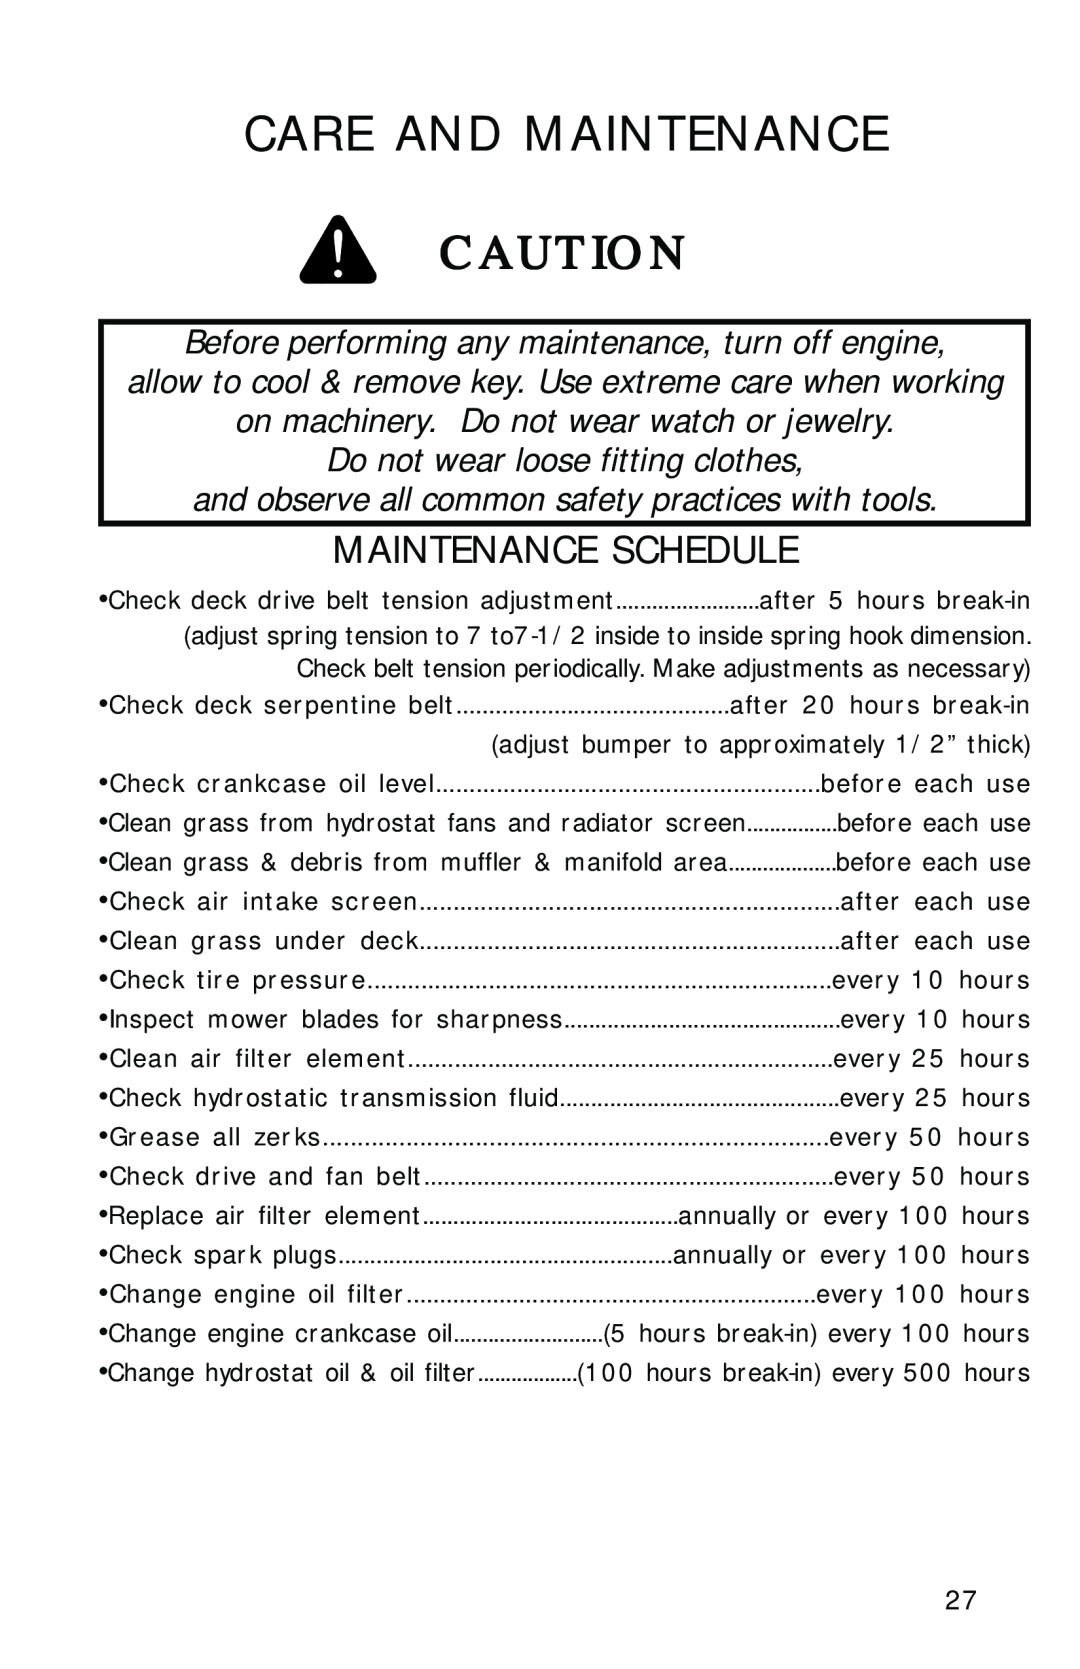 Dixon 12828-0603, ZTR 2700 Care And Maintenance, Maintenance Schedule, Before performing any maintenance, turn off engine 